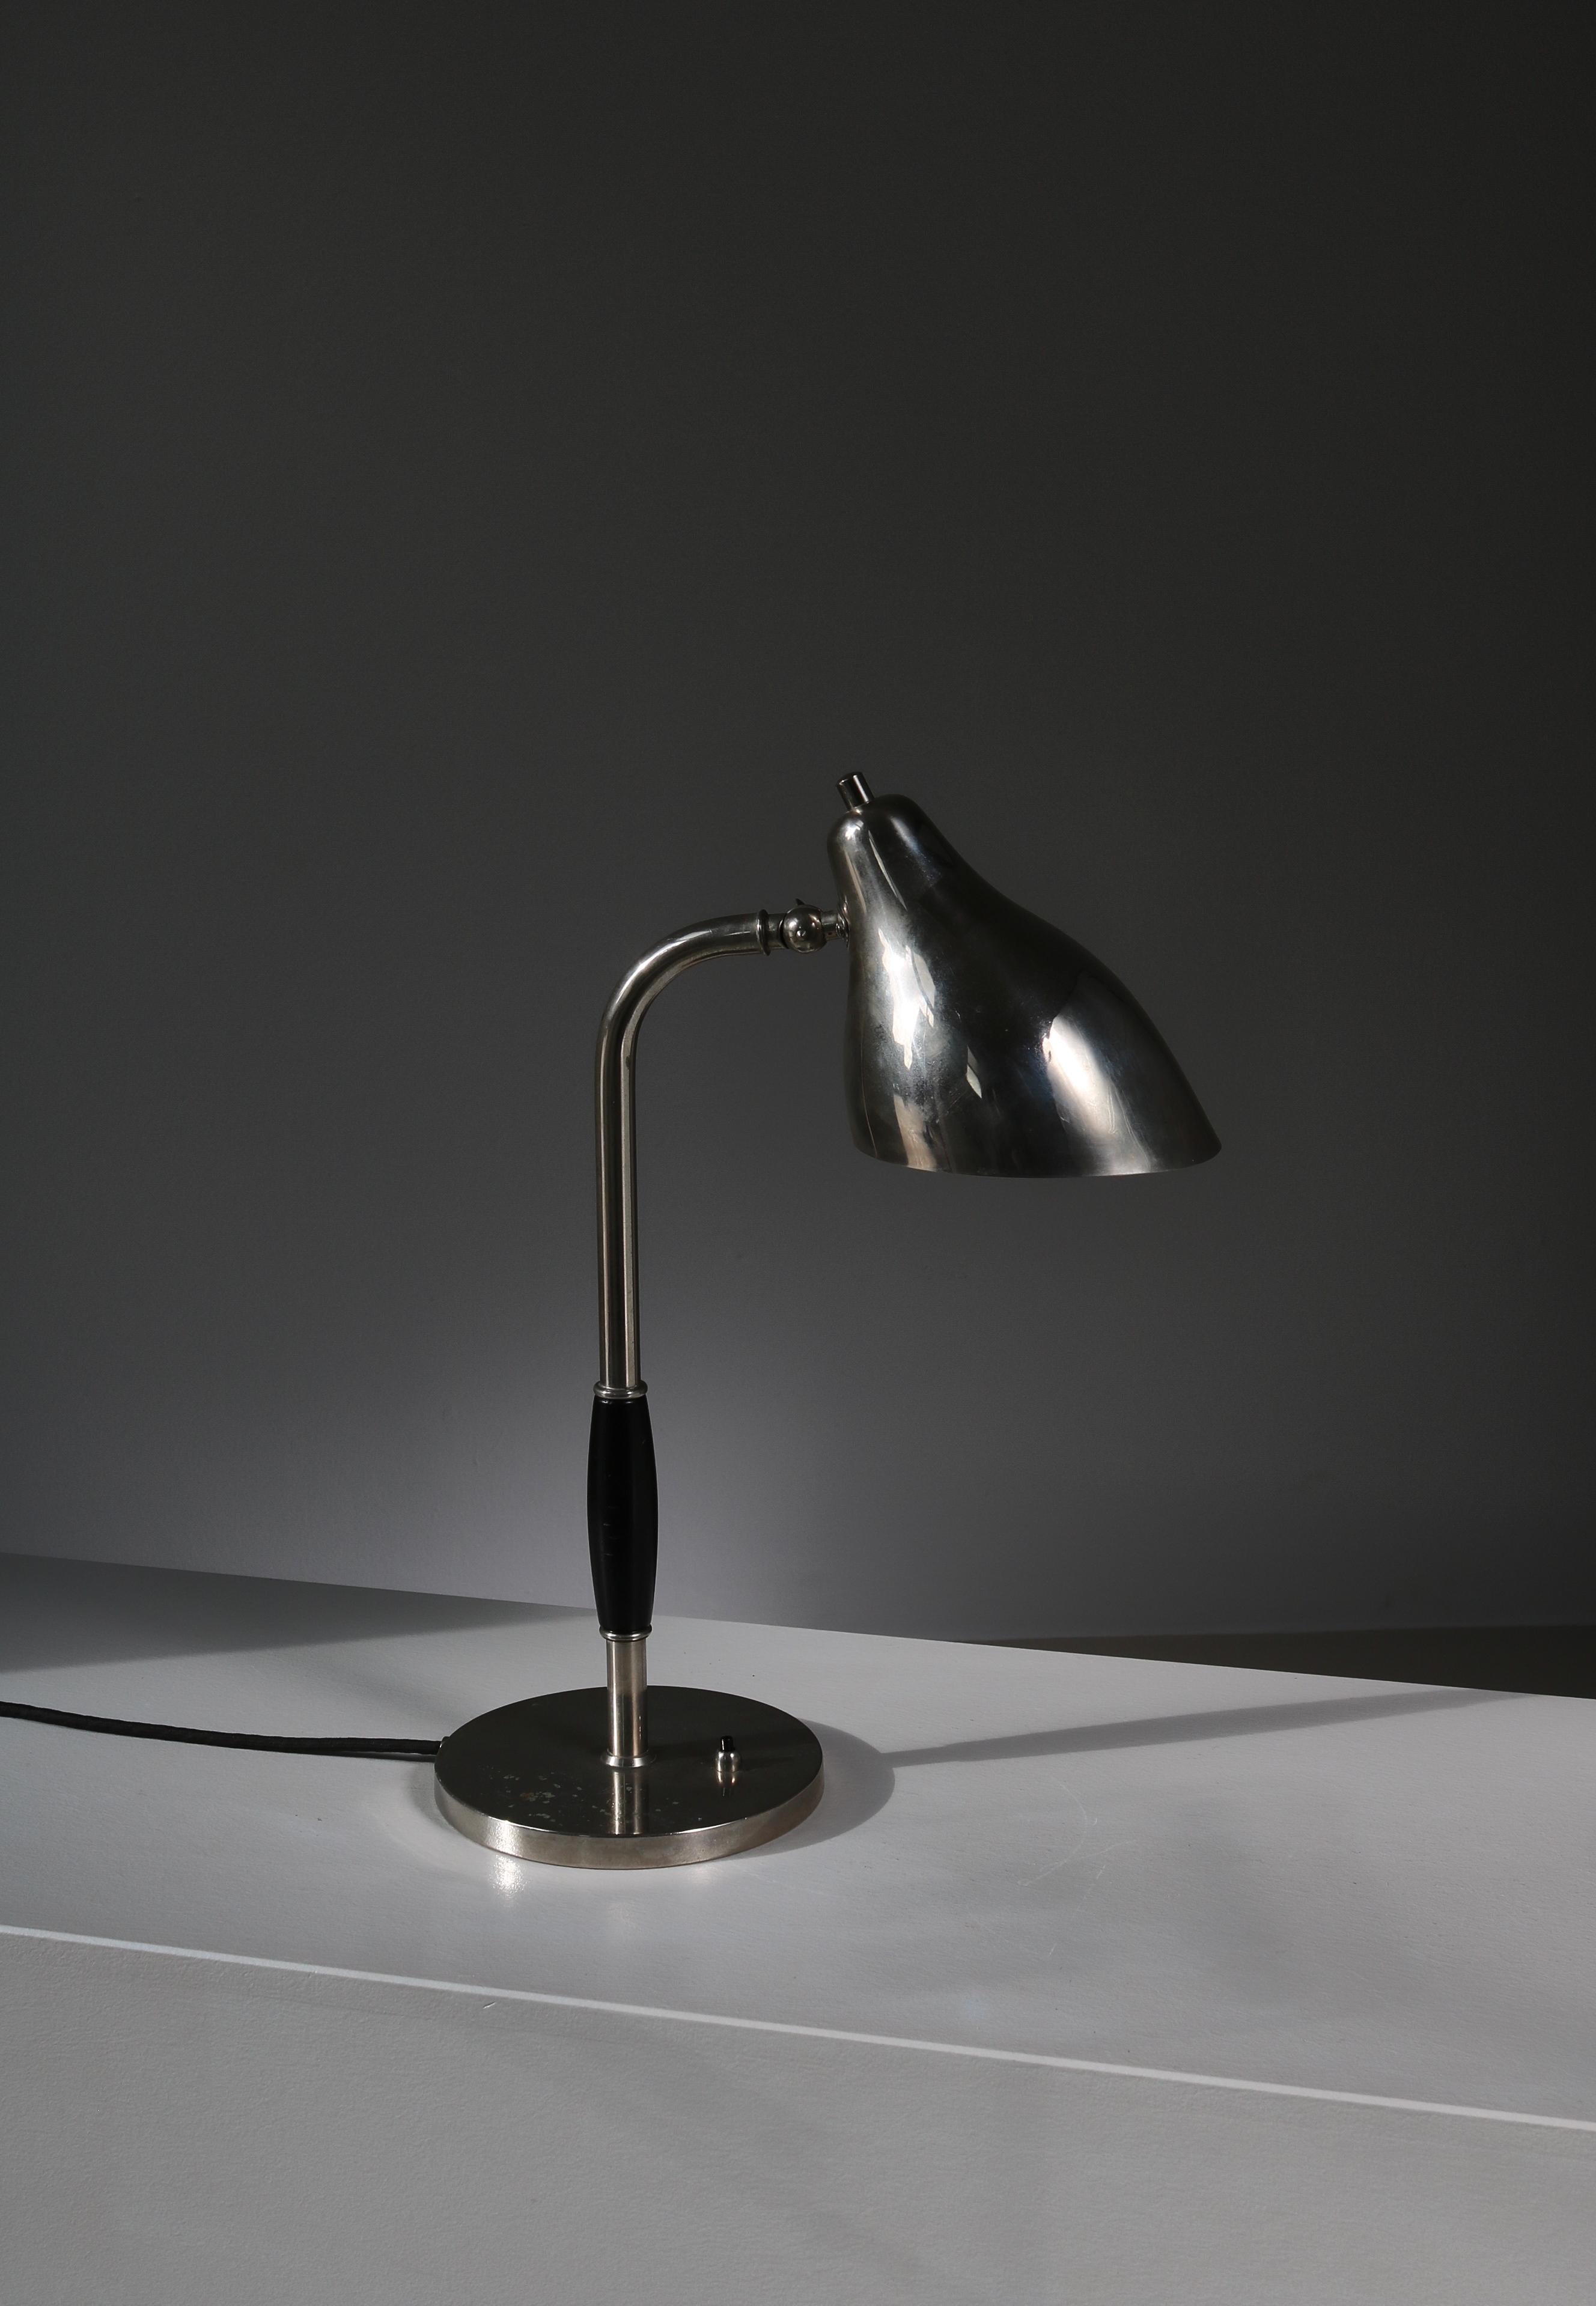 Rare table lamp designed by Vilhelm Lauritzen and manufactured by LYFA, Copenhagen in the 1940s. The lamp is made from chromed metal and the handle is black lacquered wood. 